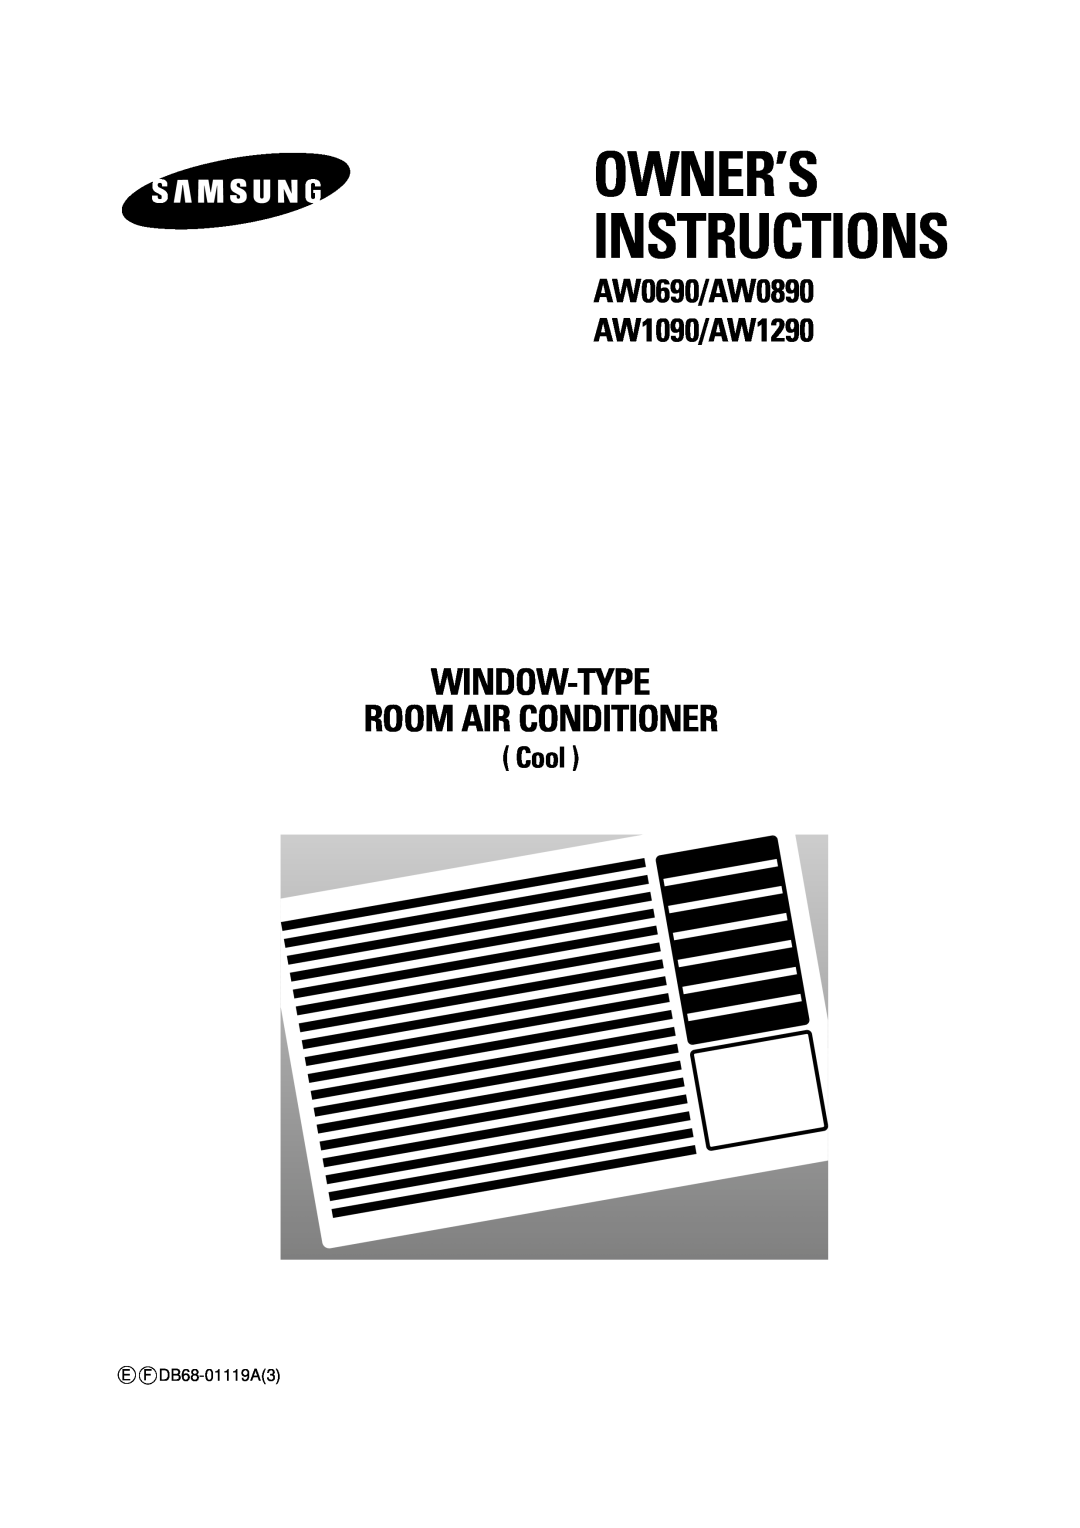 Samsung manual Owner’S Instructions, Window-Type Room Air Conditioner, AW0690/AW0890 AW1090/AW1290, Cool 